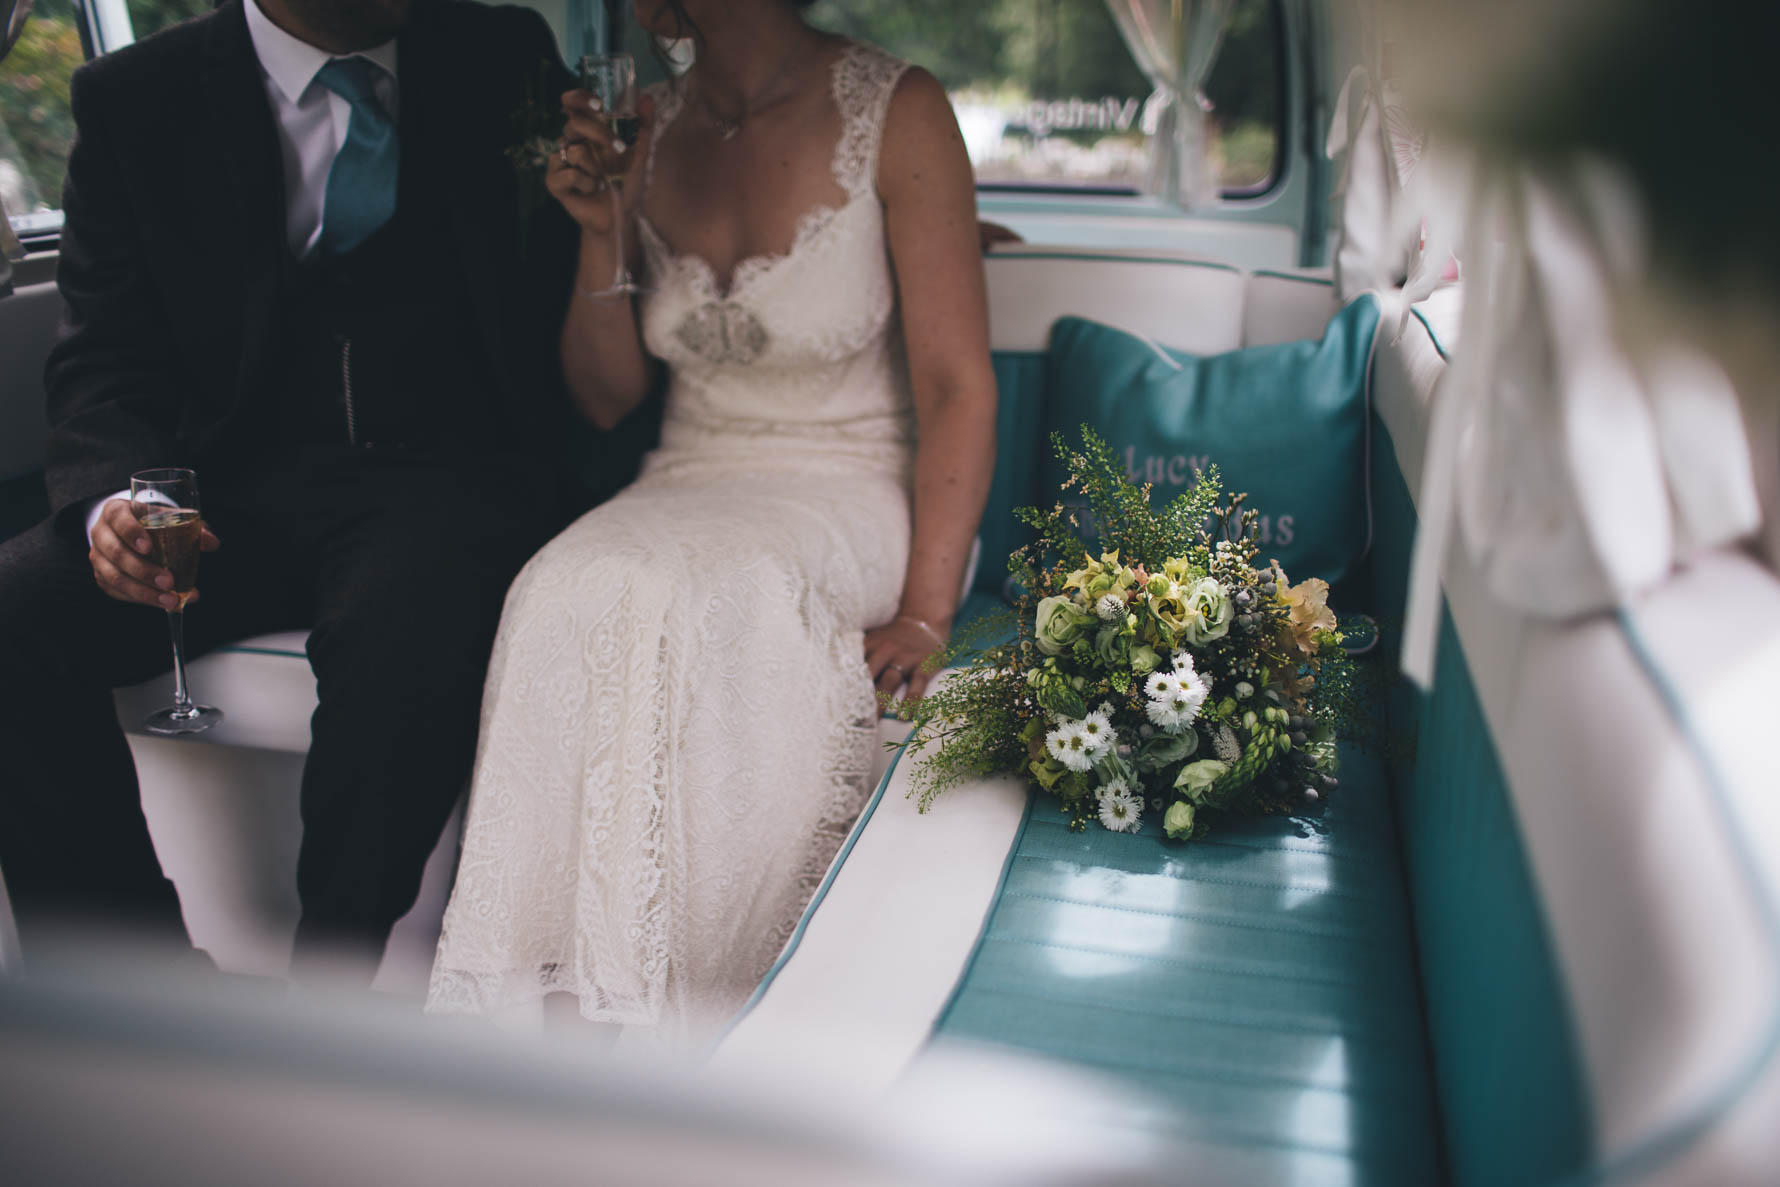 Bride and groom sat in a vintage VW campervan holding glasses of champagne with a bouquet of flowers sat on the seat beside the bride. You can only see the bride and groom from the neck down